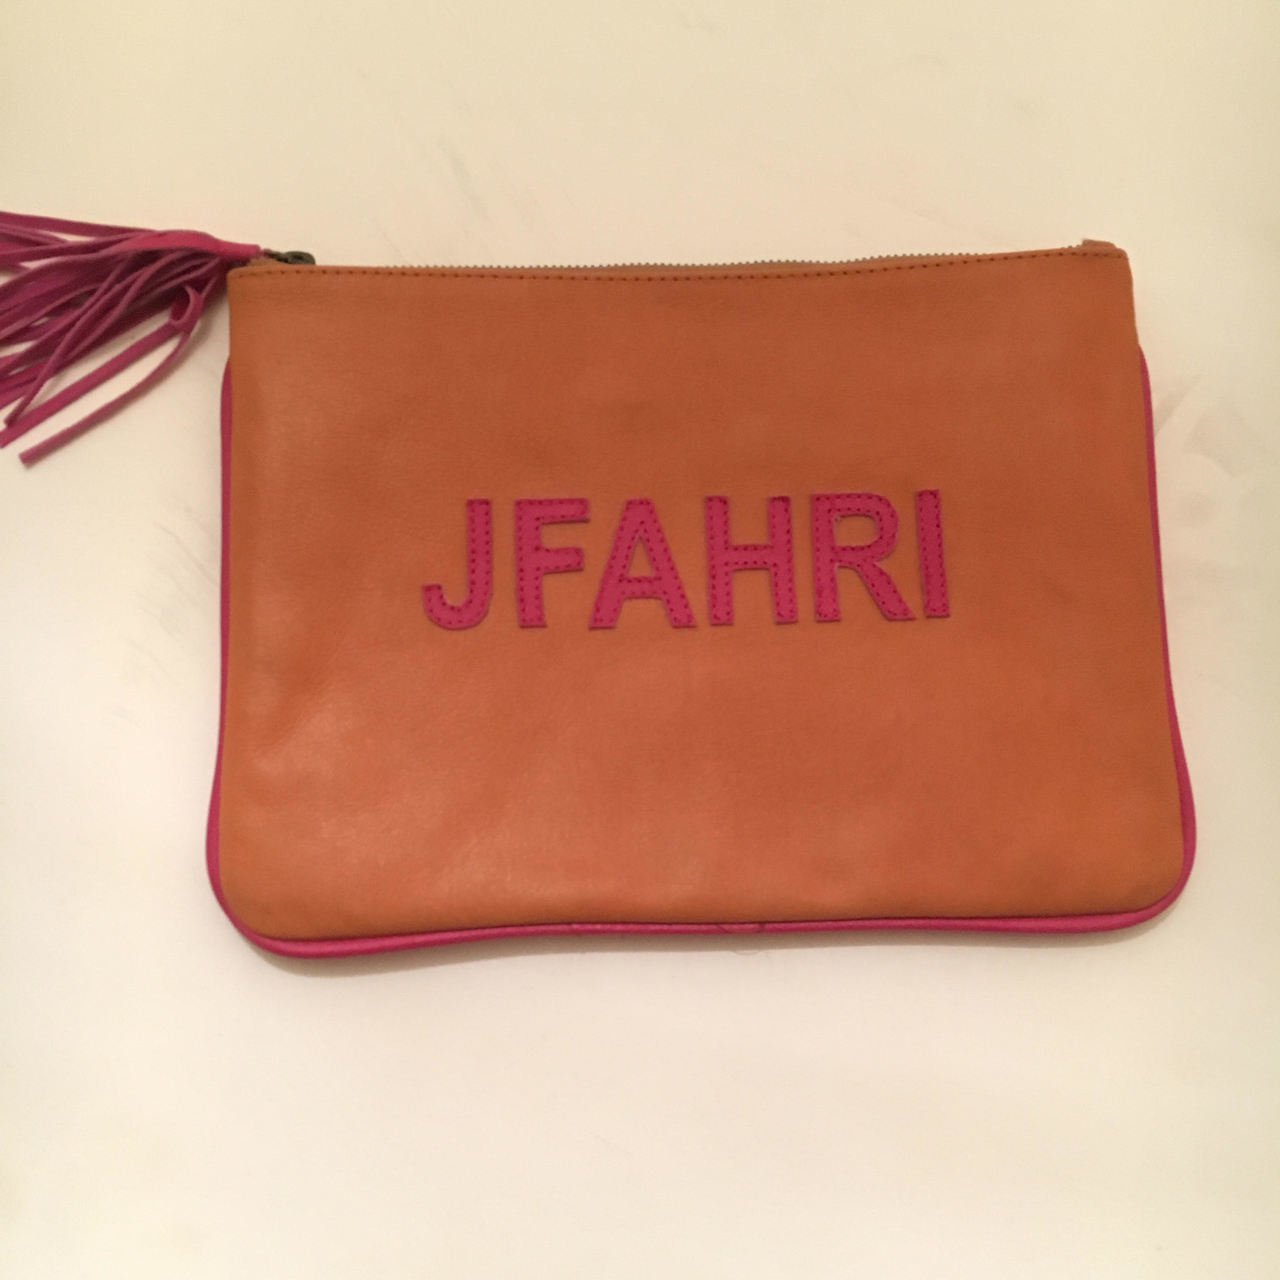 Personalised Leather Clutch-Accessories-jfahristore